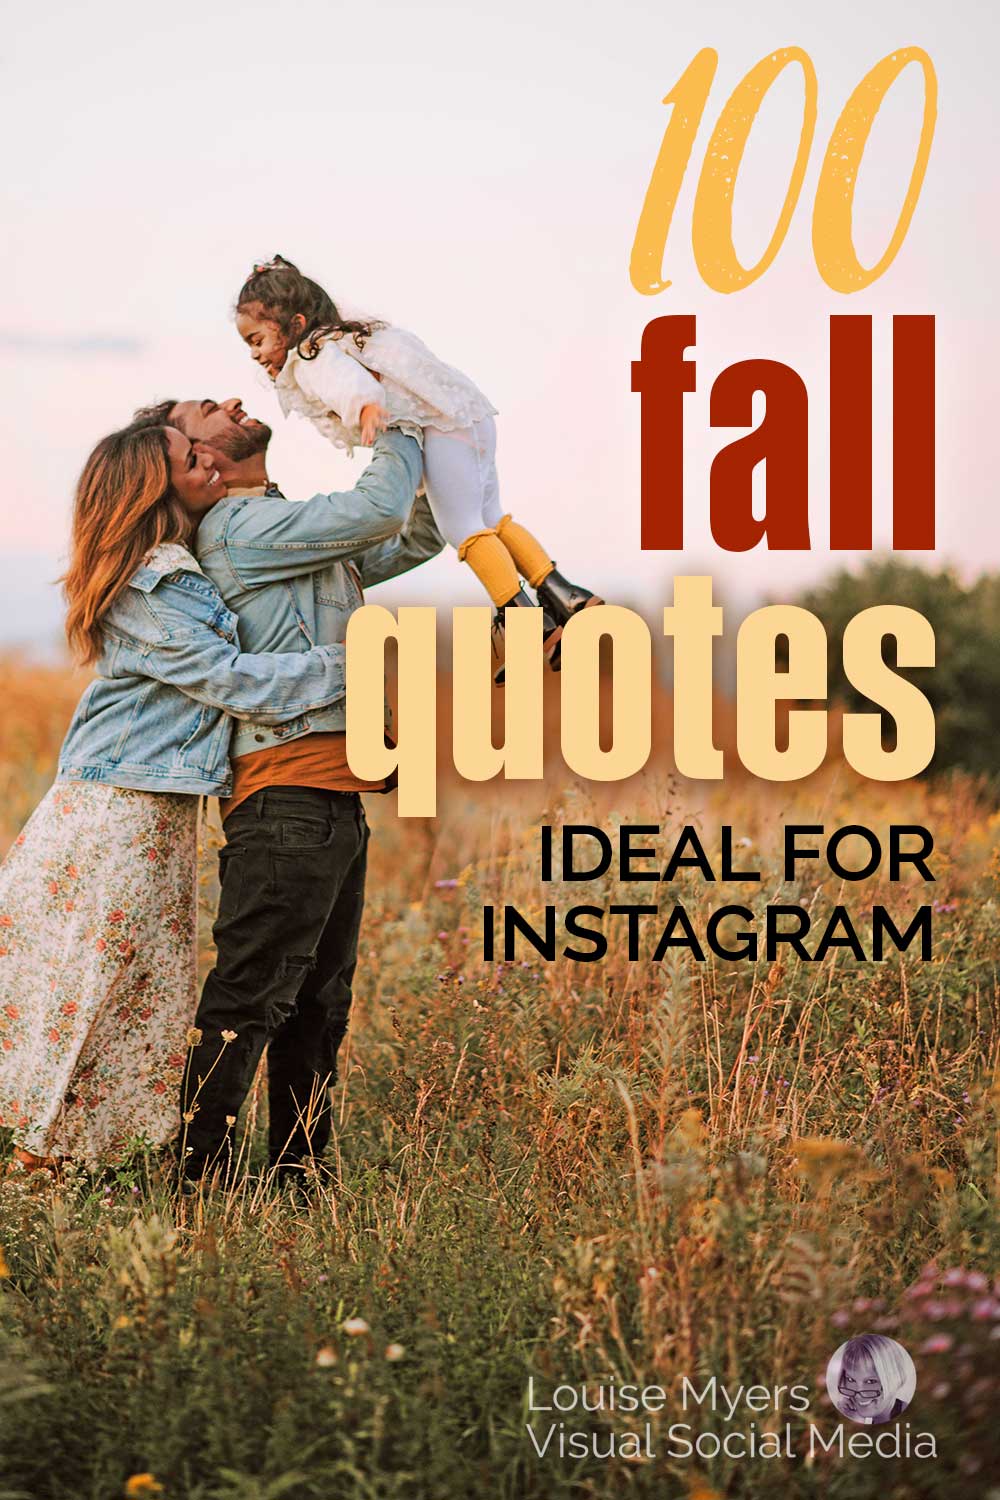 mom and dad lifting daughter in autumn colored field with words 100 fall quotes ideal for instagram.